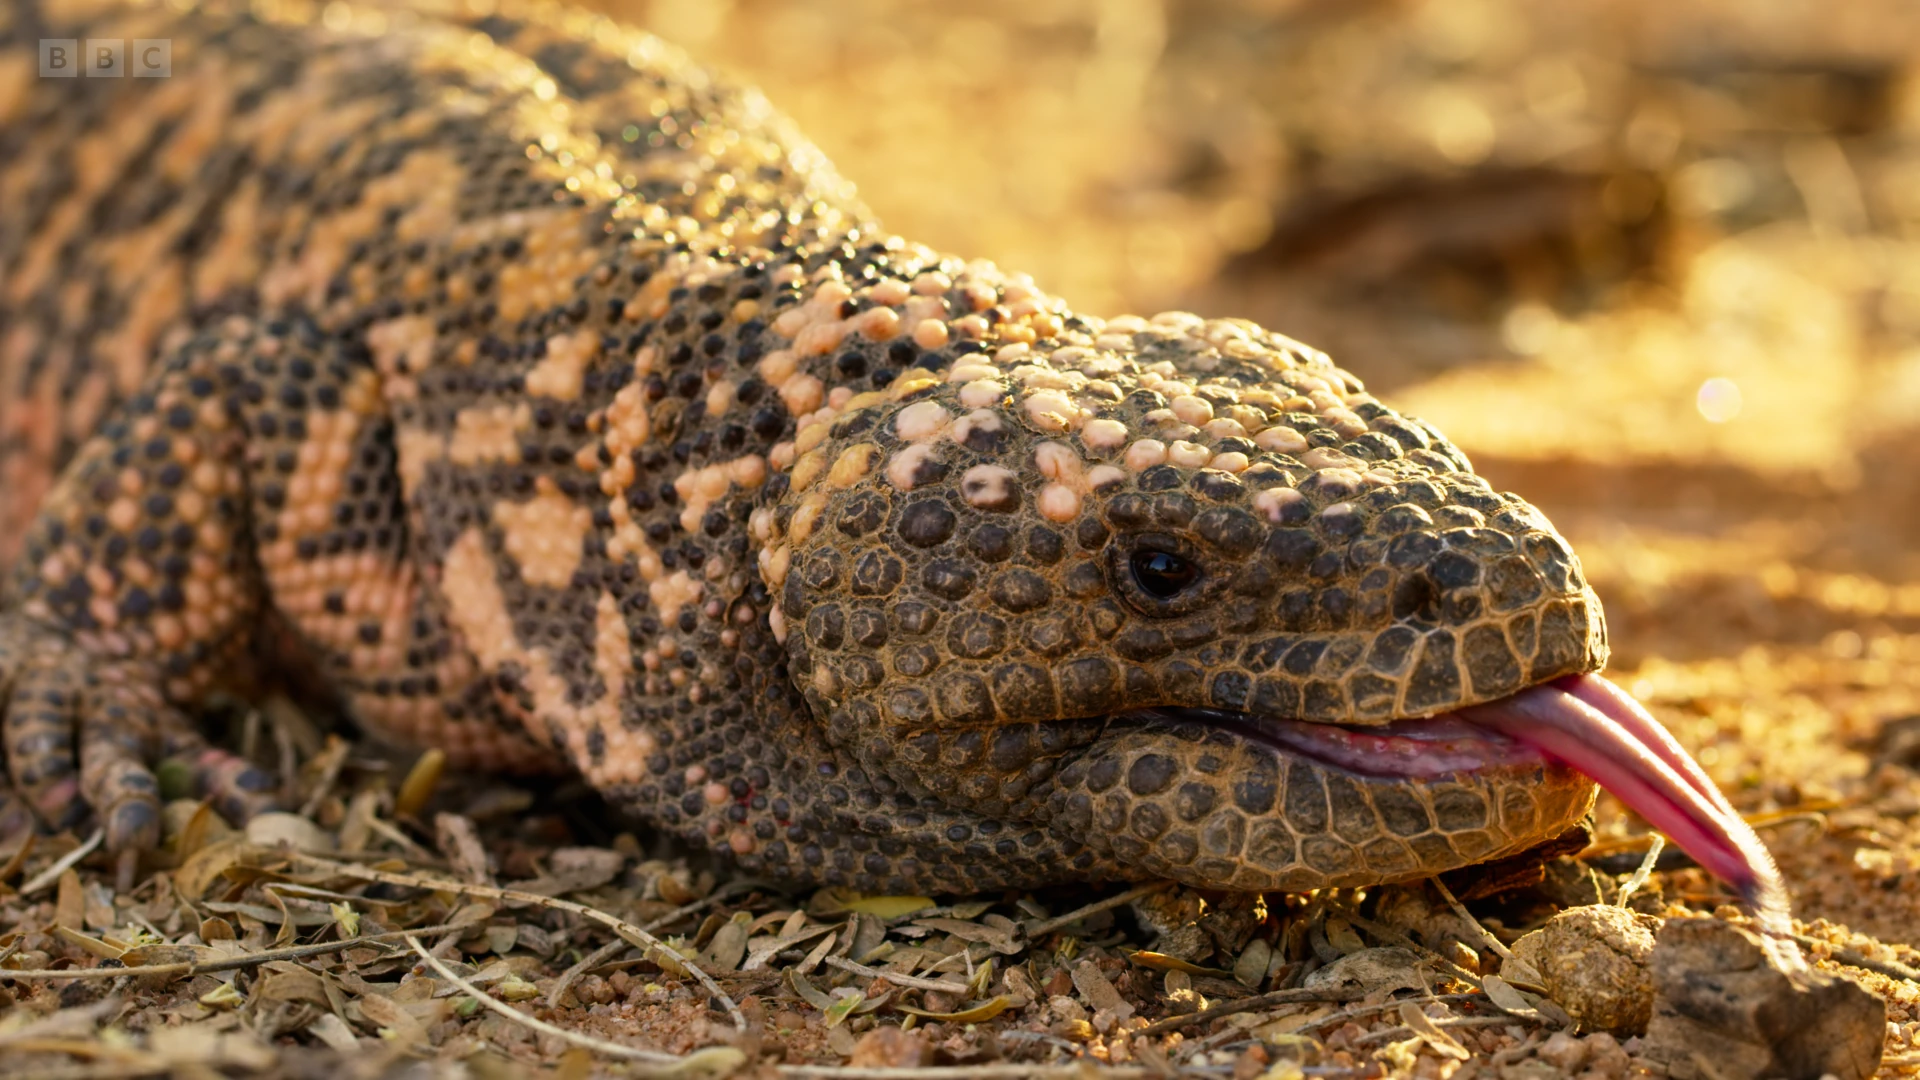 Gila monster (Heloderma suspectum) as shown in Seven Worlds, One Planet - North America